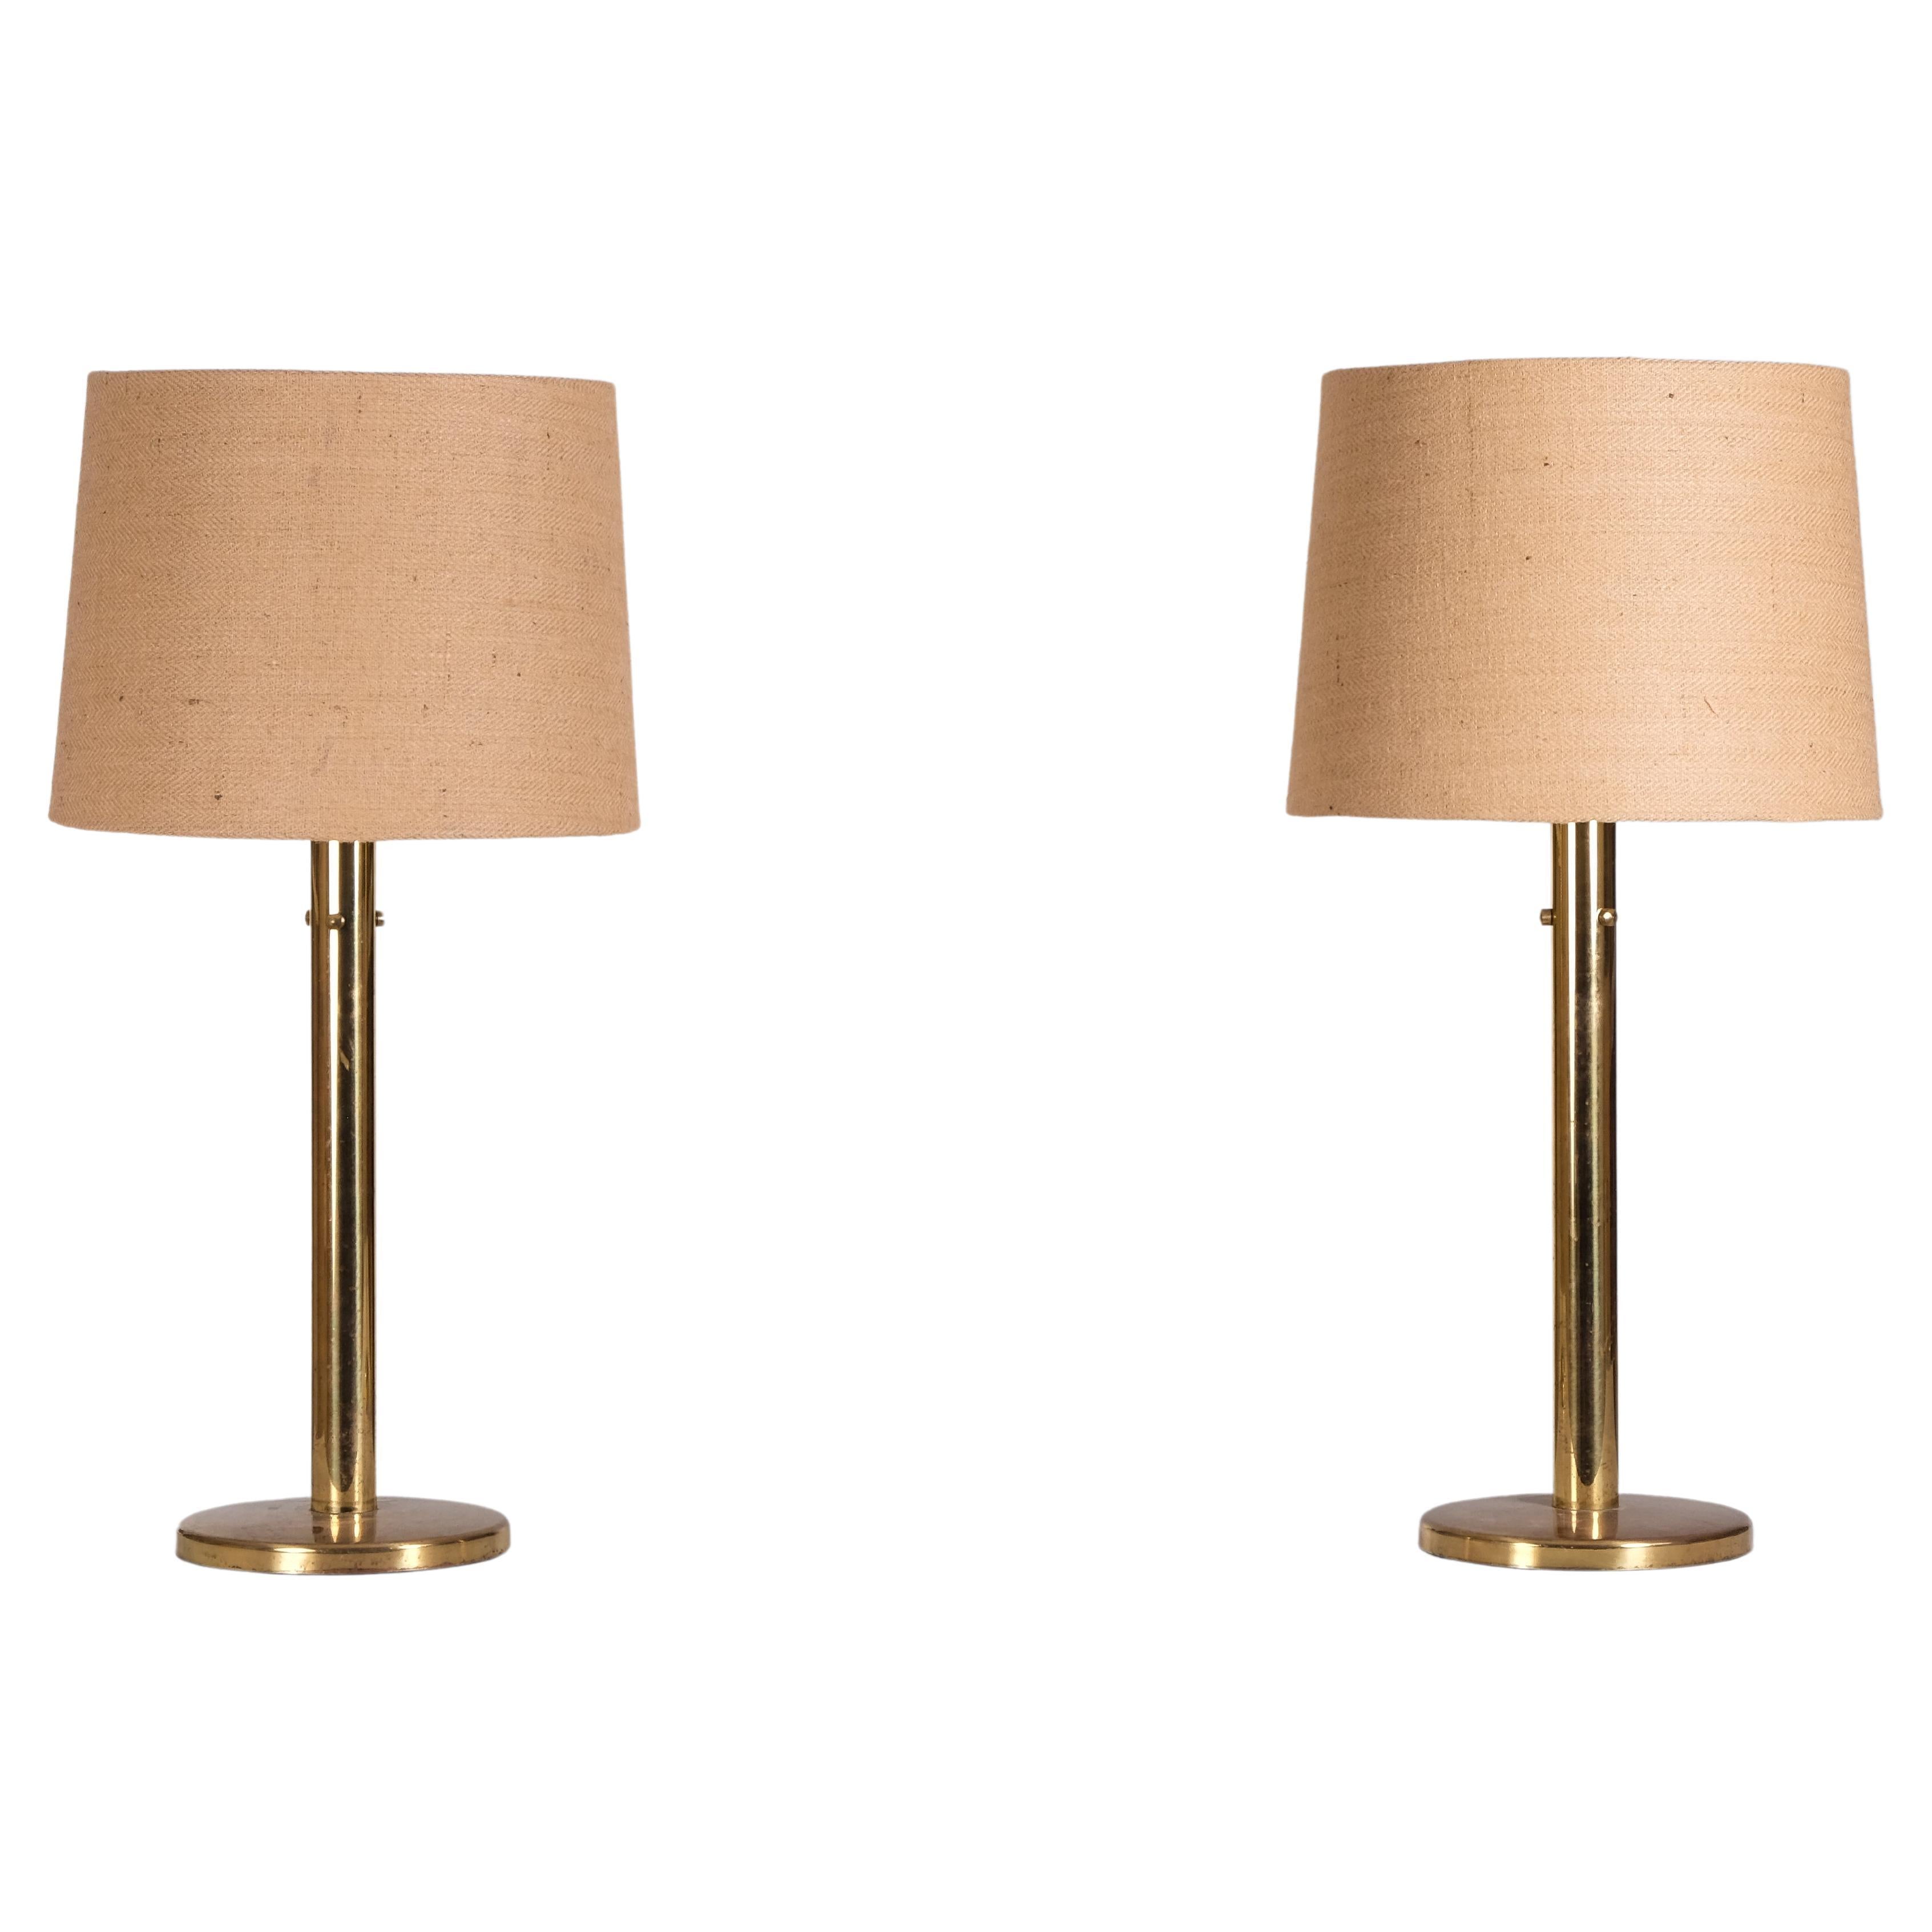 Pair of Hans-Agne Jakobsson Brass Table Lamps, 1970s